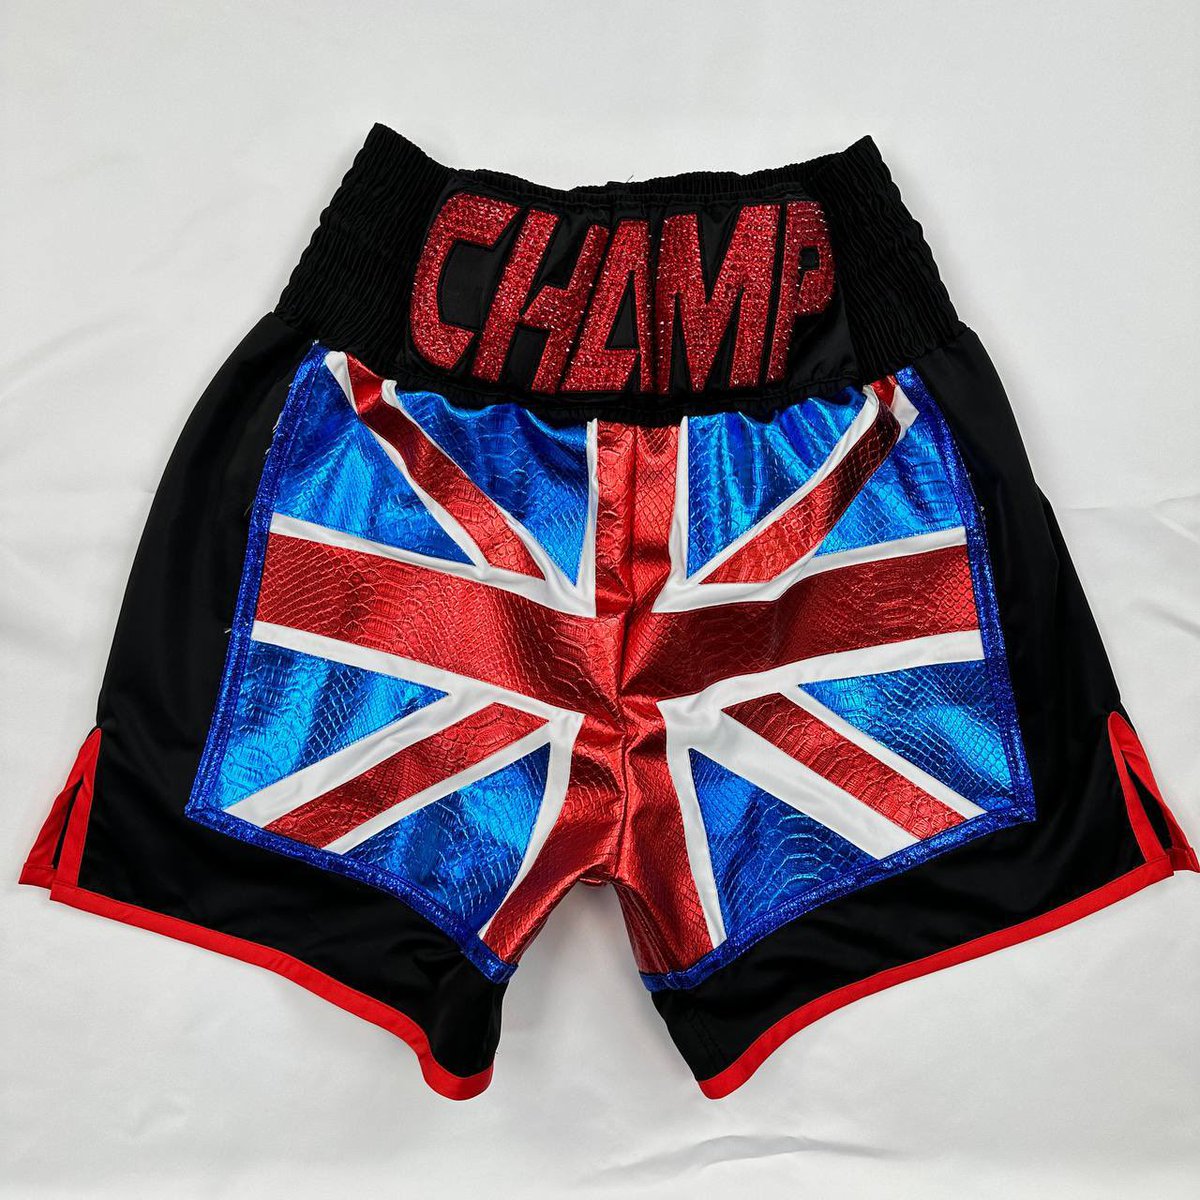 Unleash your style in the ring with 'United Kingdom' custom boxing shorts! 🥊🇬🇧 Crafted for comfort and durability, these shorts are fully customizable to reflect your unique personality. Step into the ring with confidence and order yours today! #BoxingShorts #CustomizeYourStyle